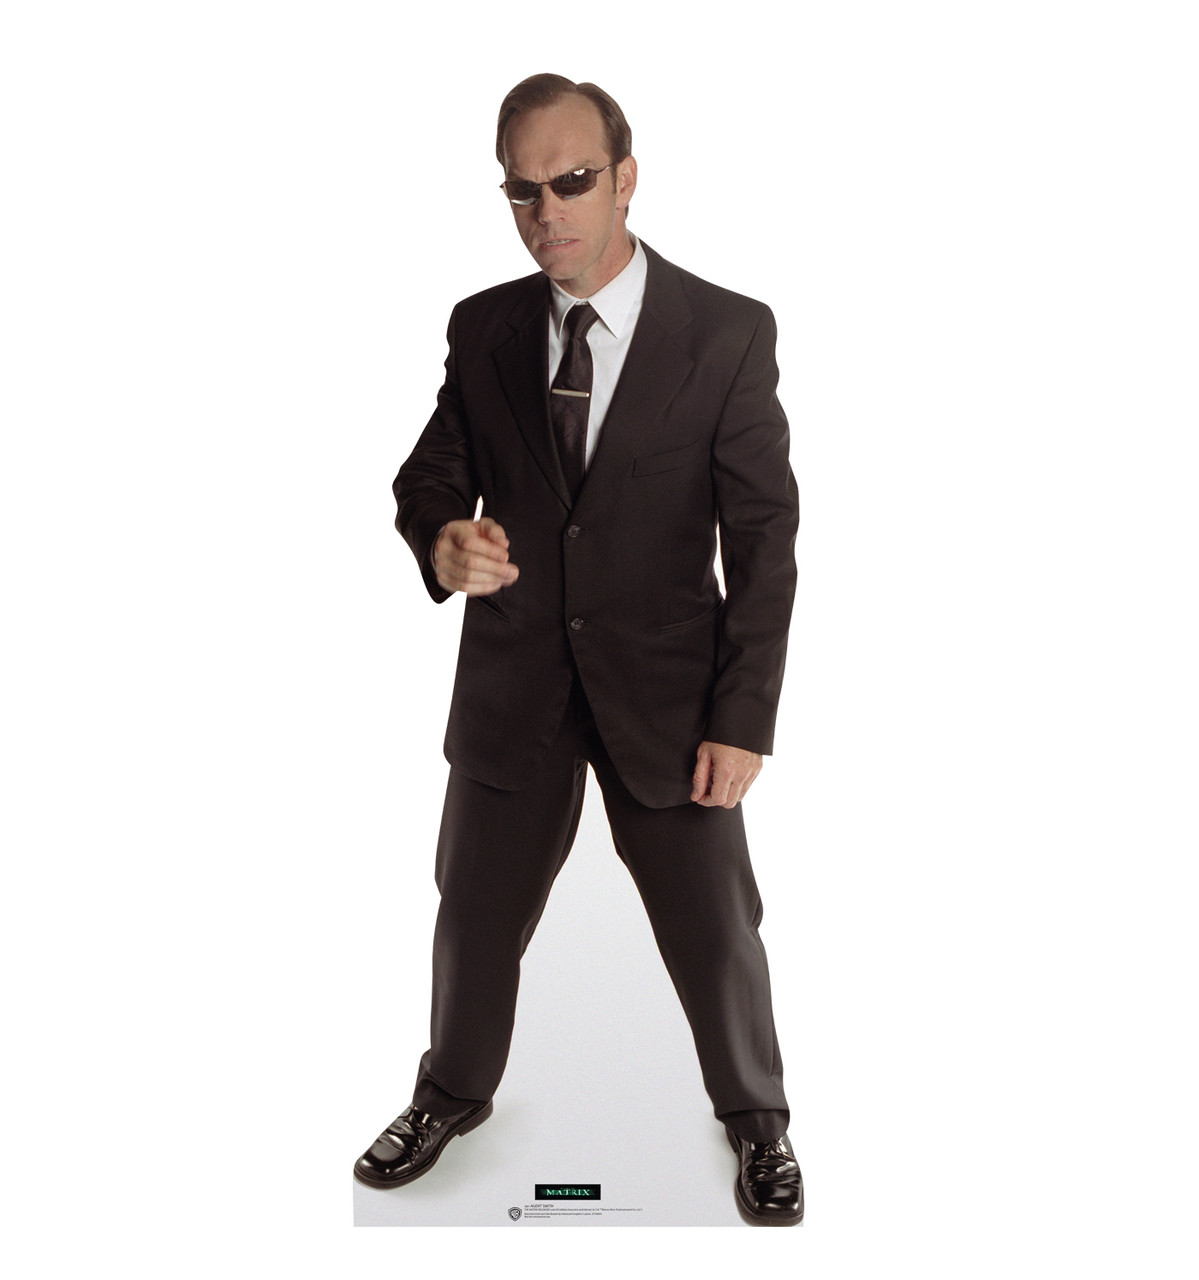 Life-size cardboard standee of Agent Smith from the movie The Matrix.